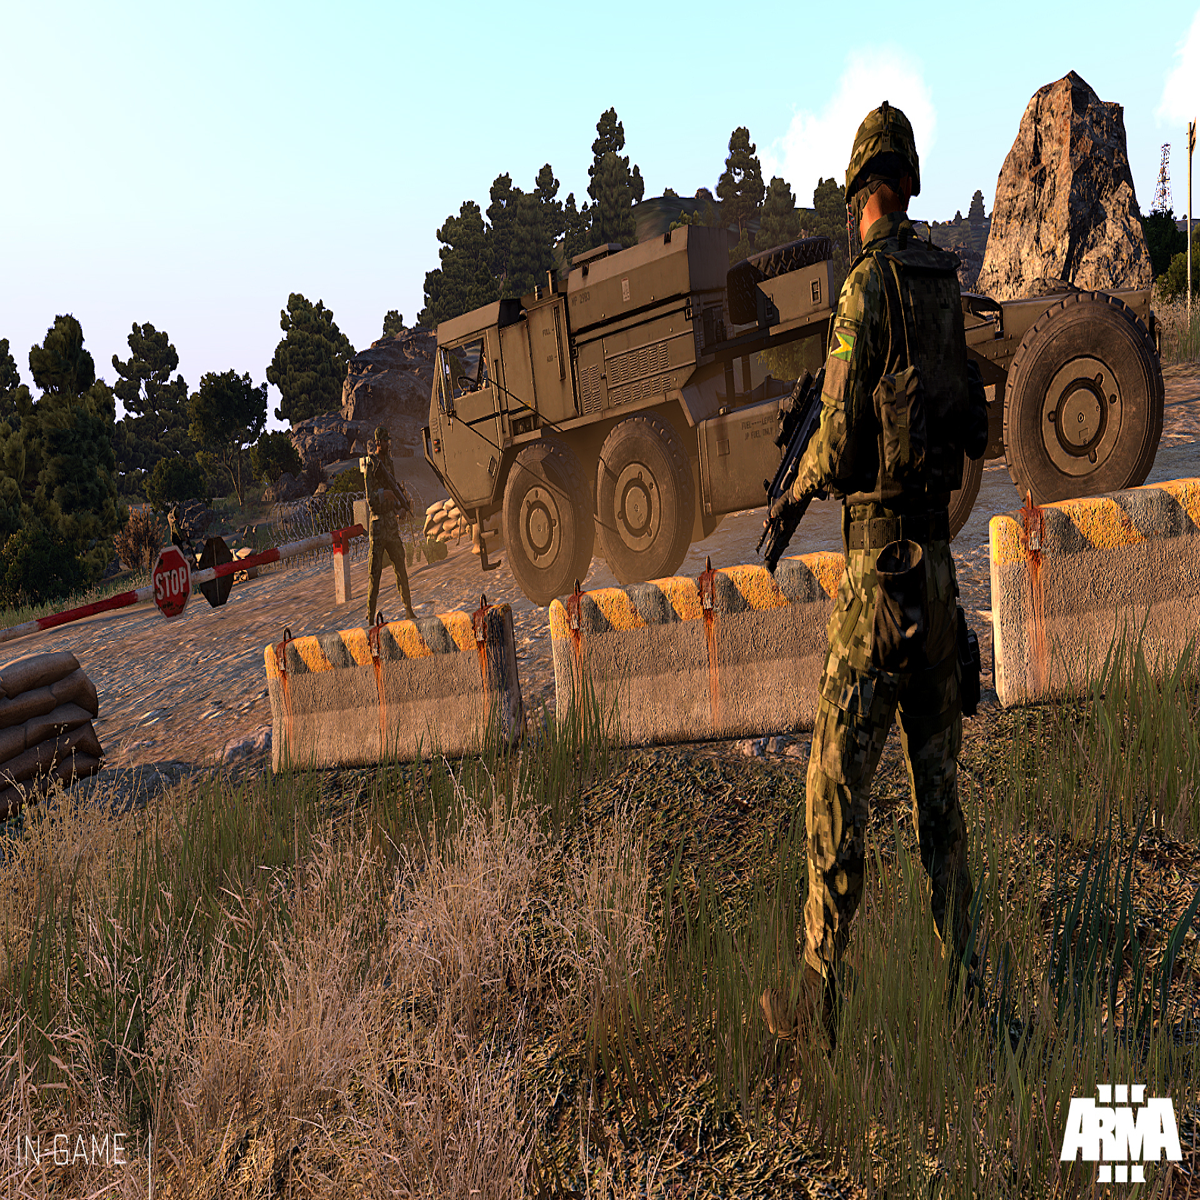 Arma's console debut to be timed Xbox exclusive, leak suggests